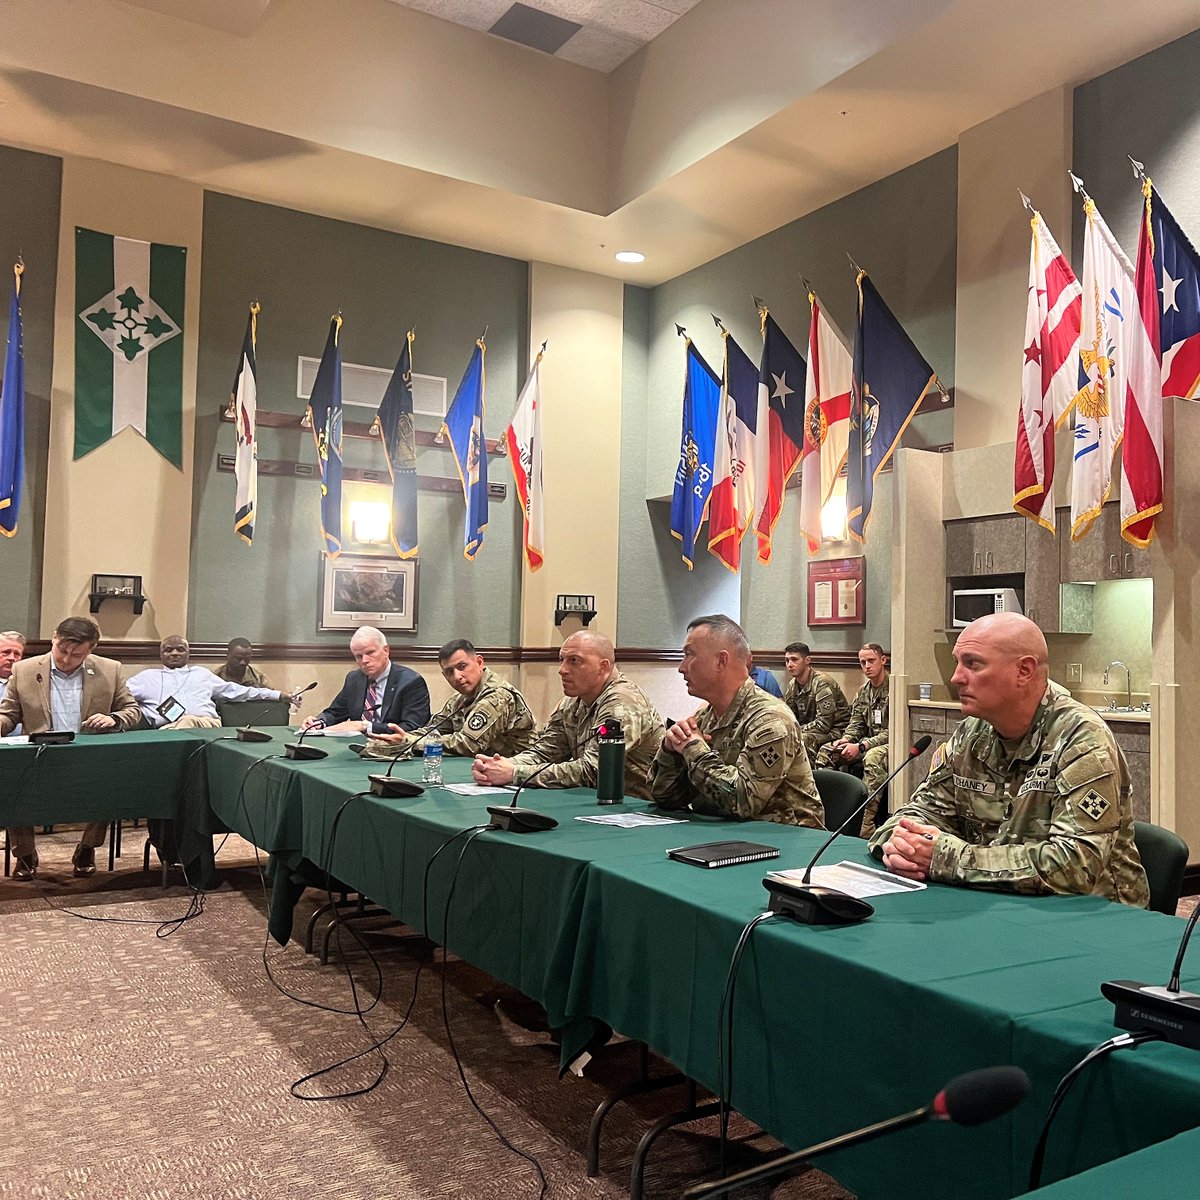 Supt. Degenfelder recently joined education leaders from across the country to attend the U.S. Army Educator tour. She discussed opportunities to further develop the citizenship initiative laid out in the WDE strategic plan.

#WyDeptEd #WyoEdChat #WyomingEducation #Citizenship